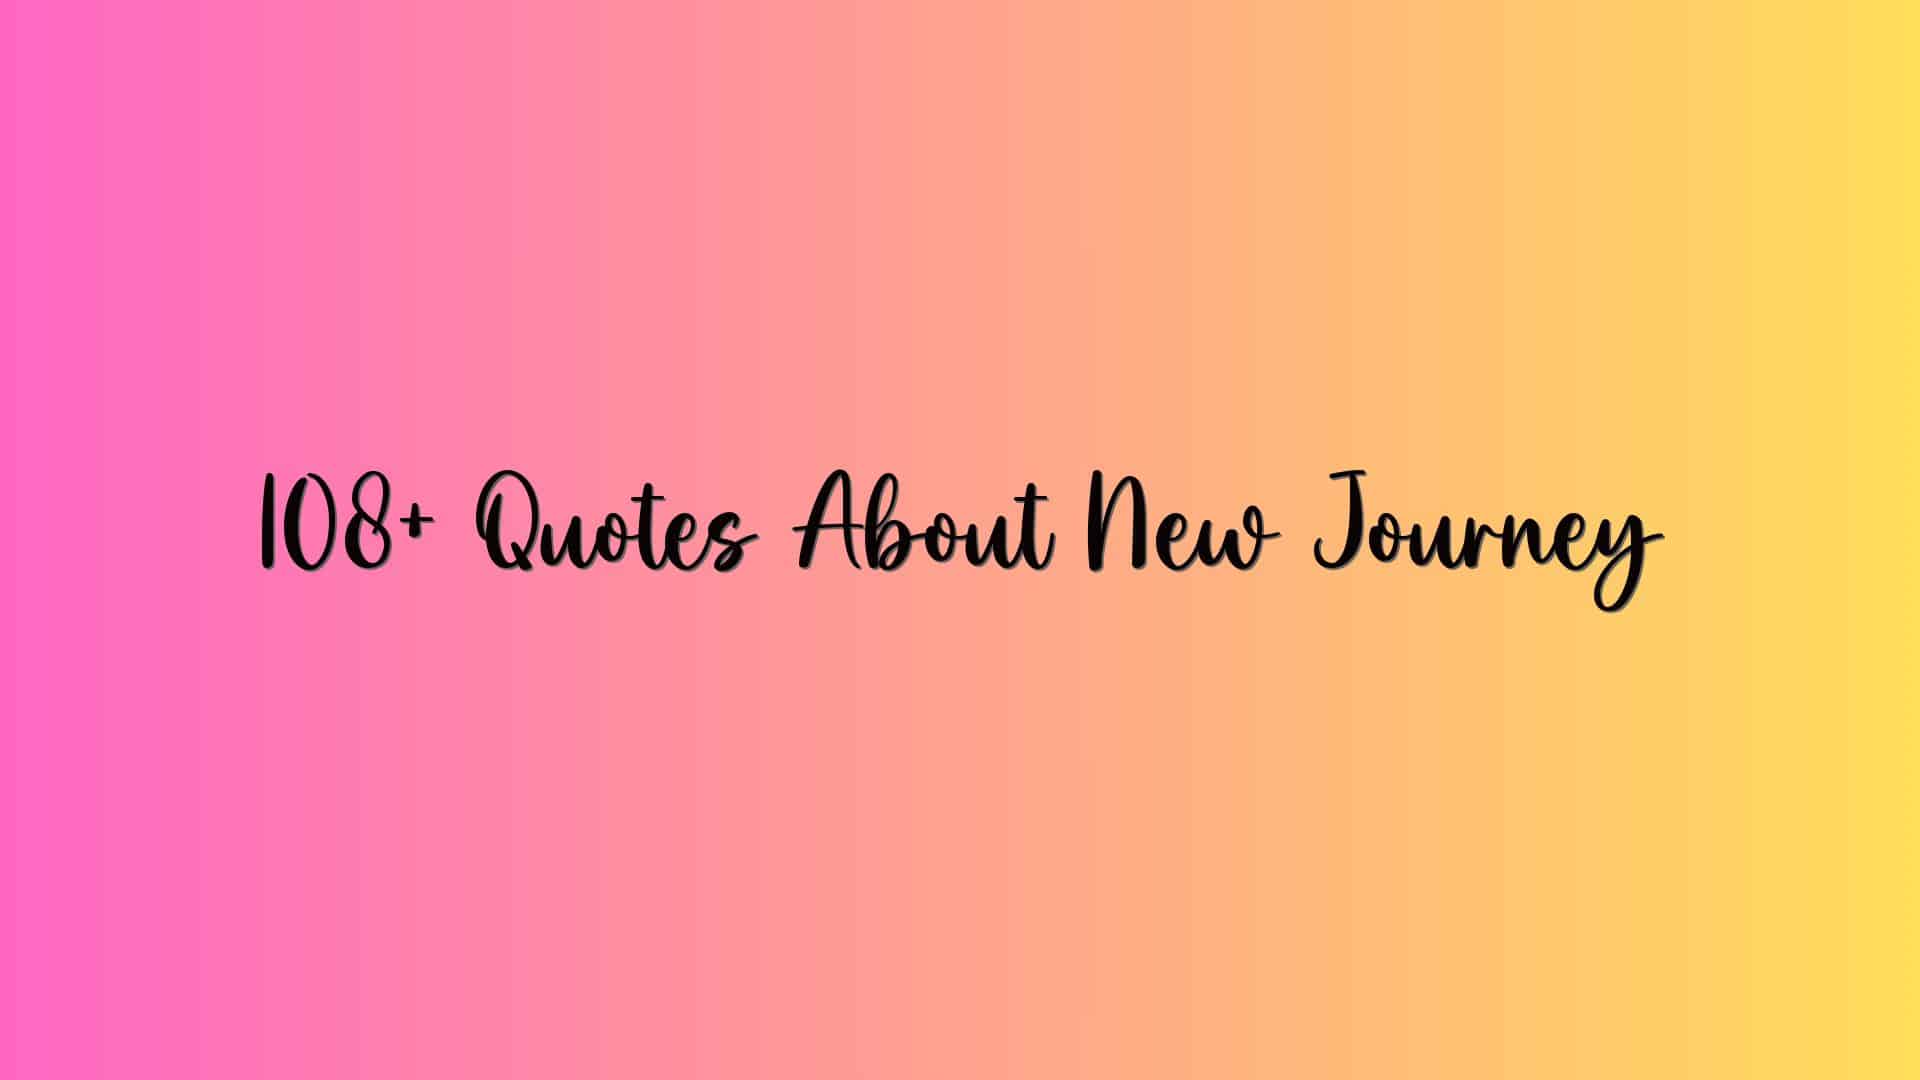 108+ Quotes About New Journey